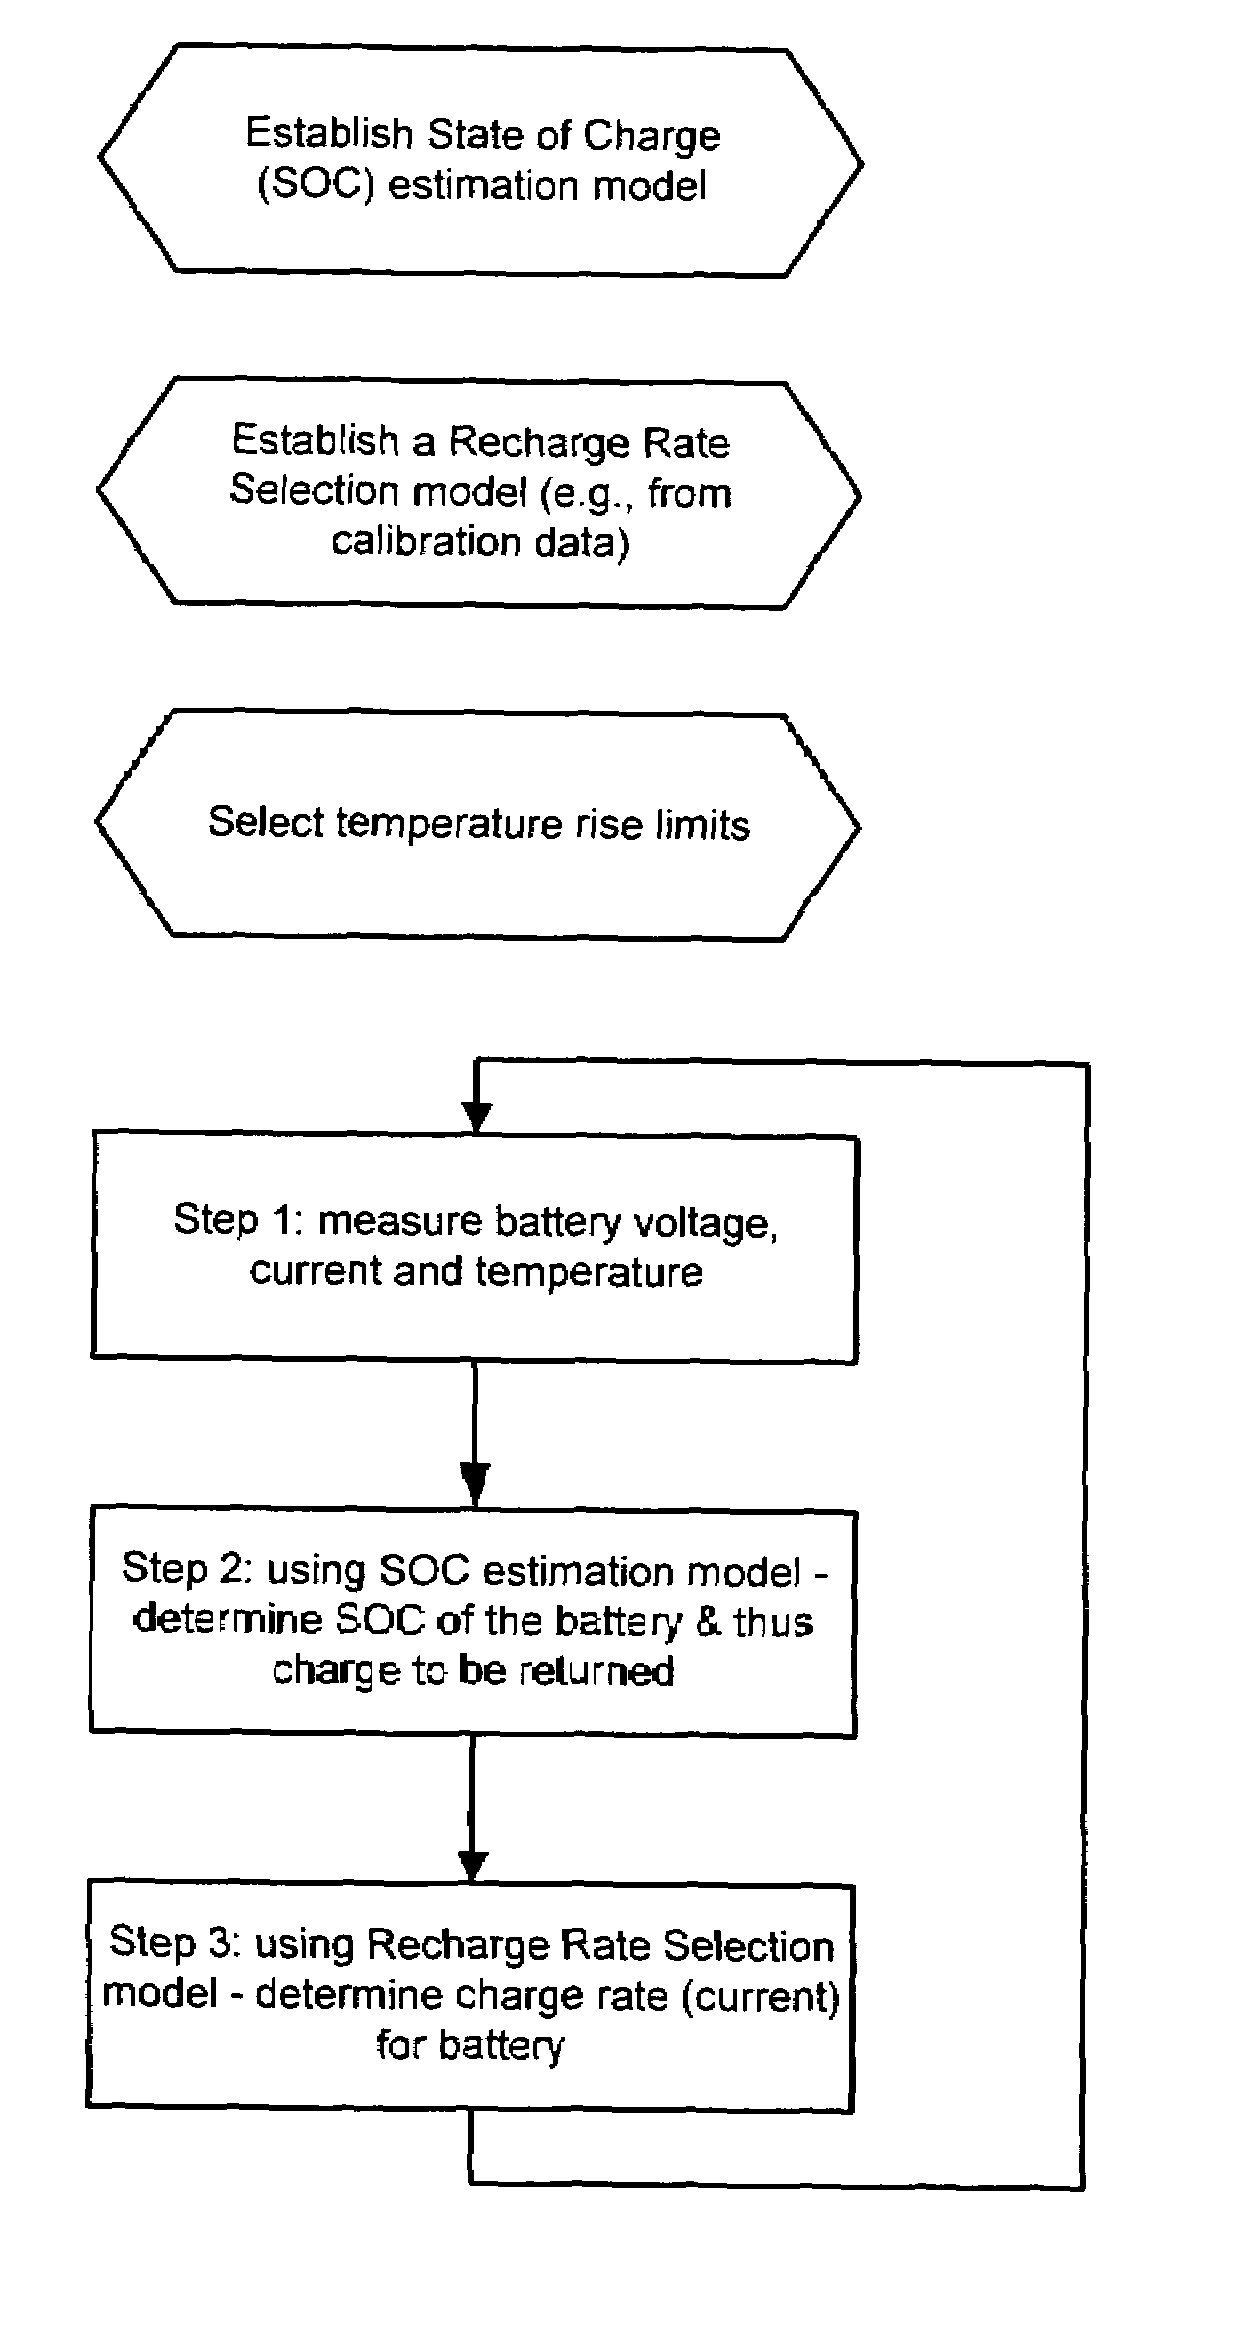 Stress management of battery recharge, and method of state of charge estimation